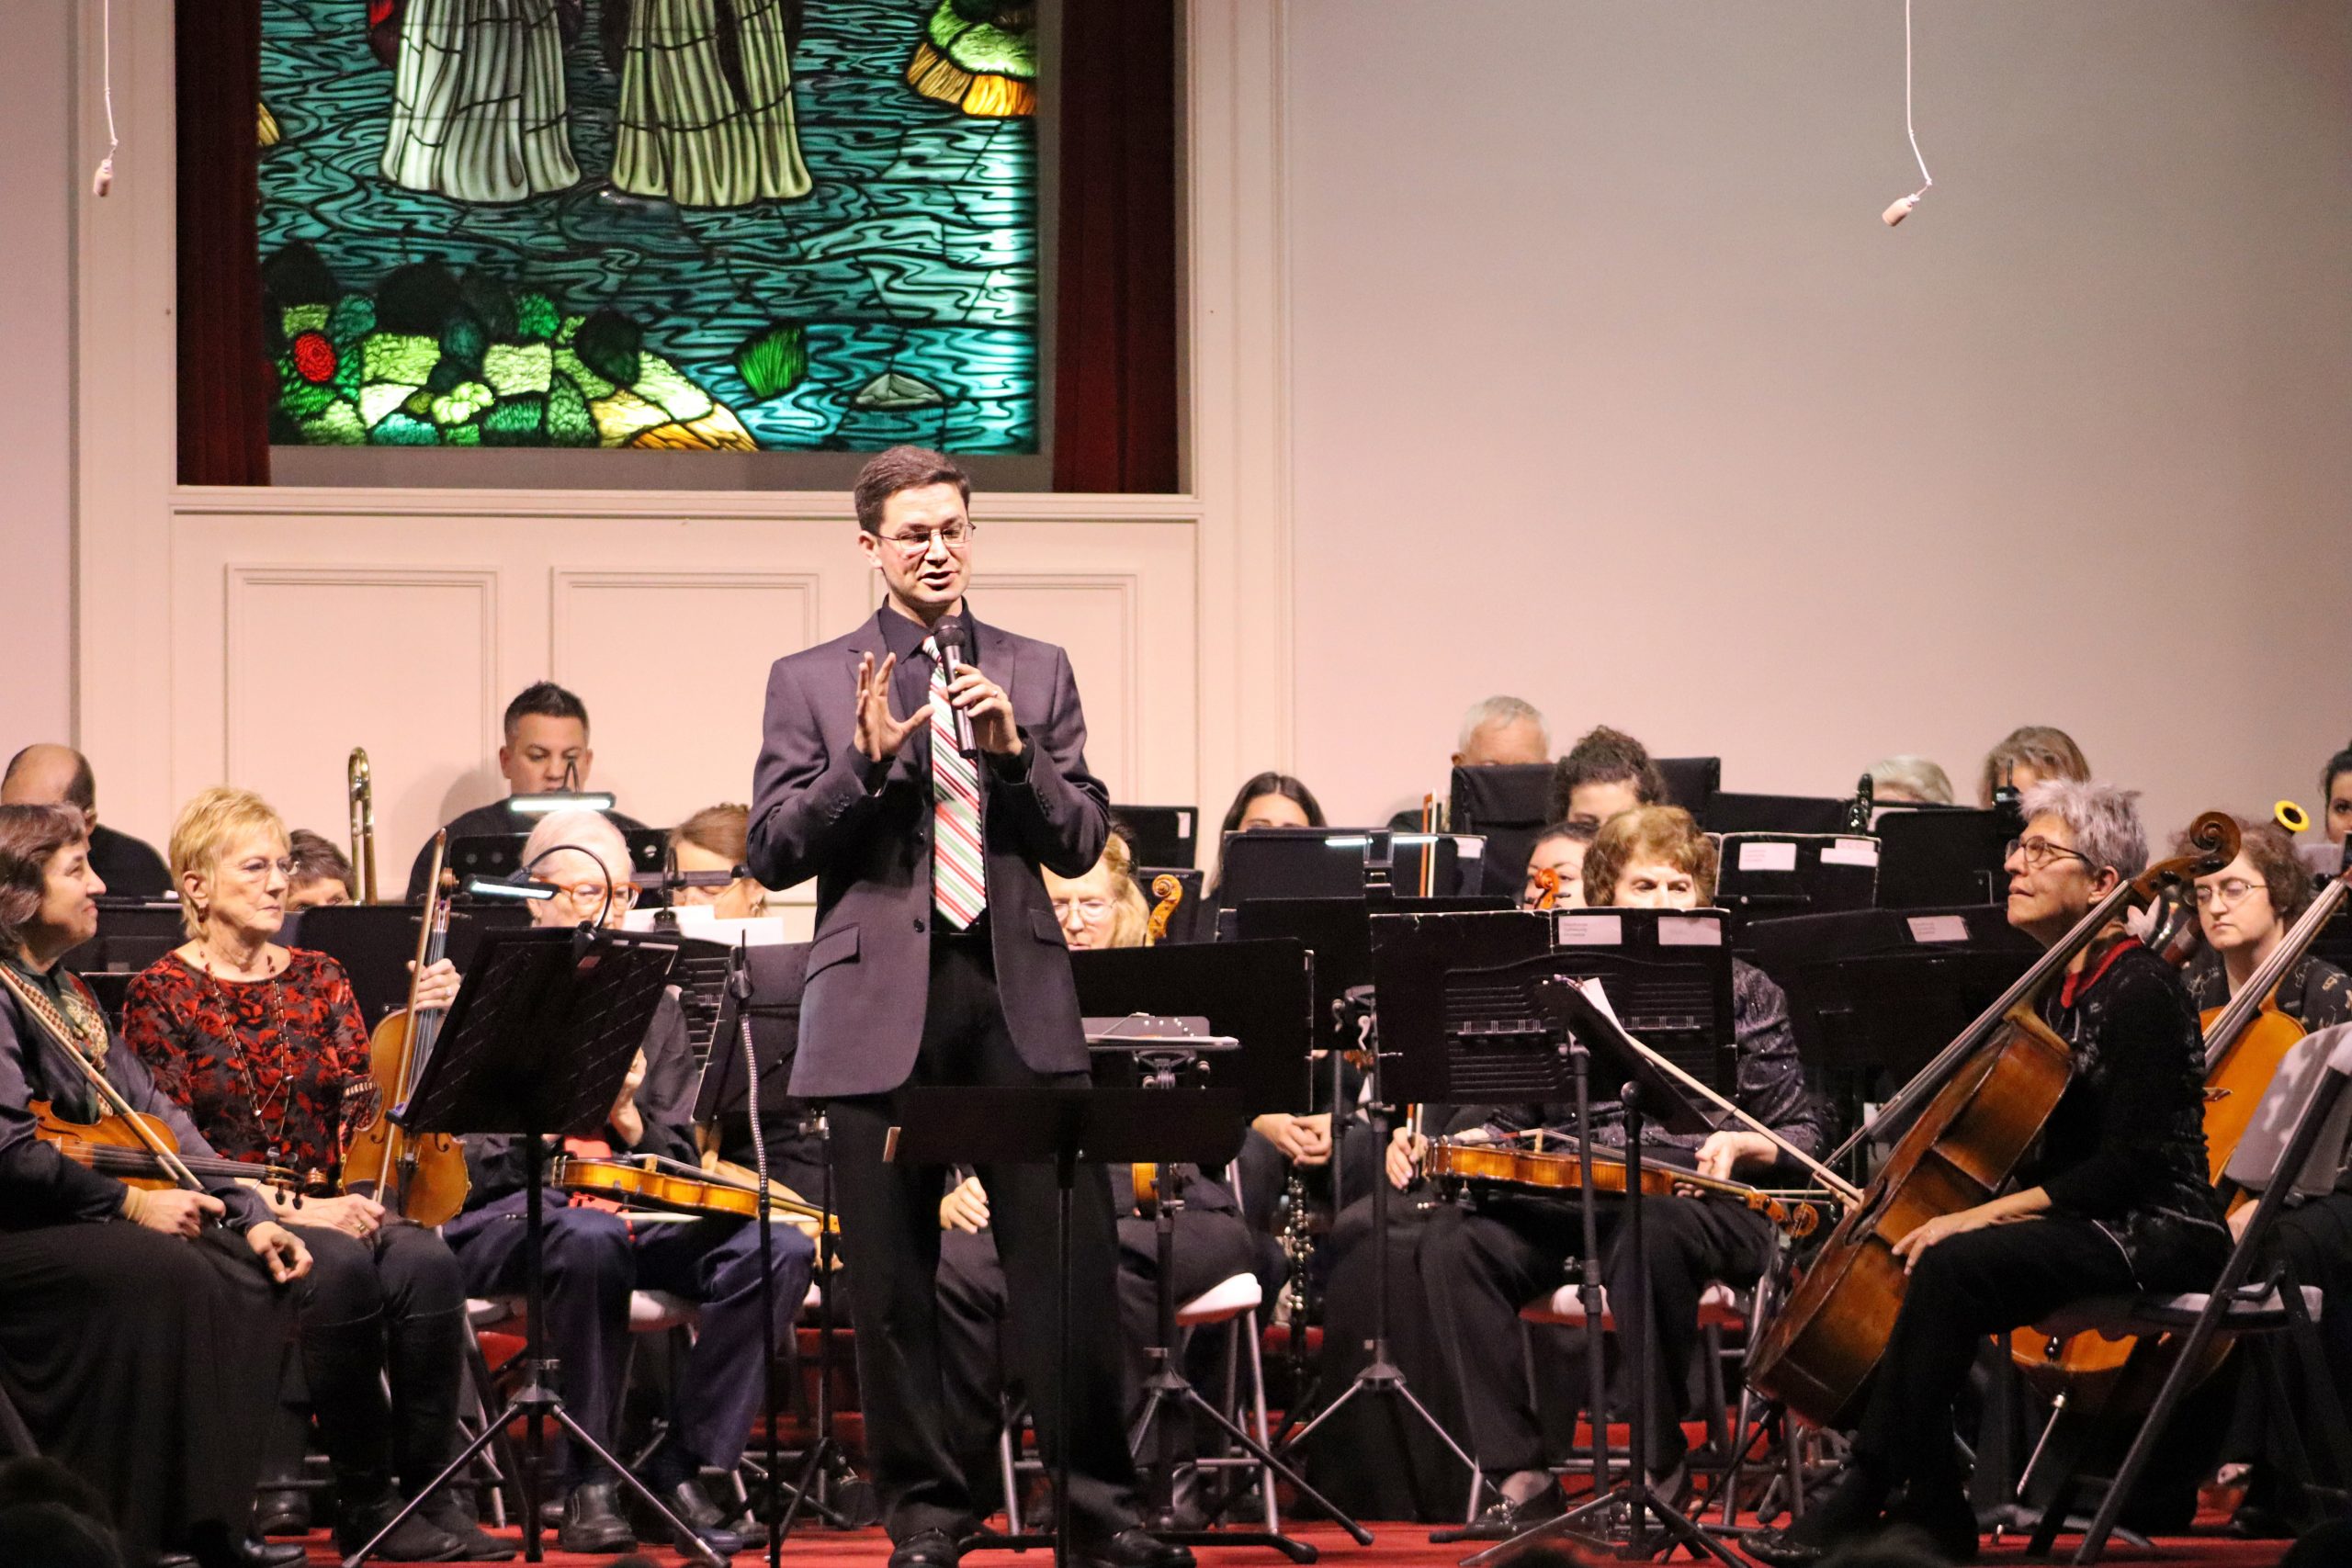 gloucester courthouse community orchestra christmas concert conductor jarrett kocan 1 from T